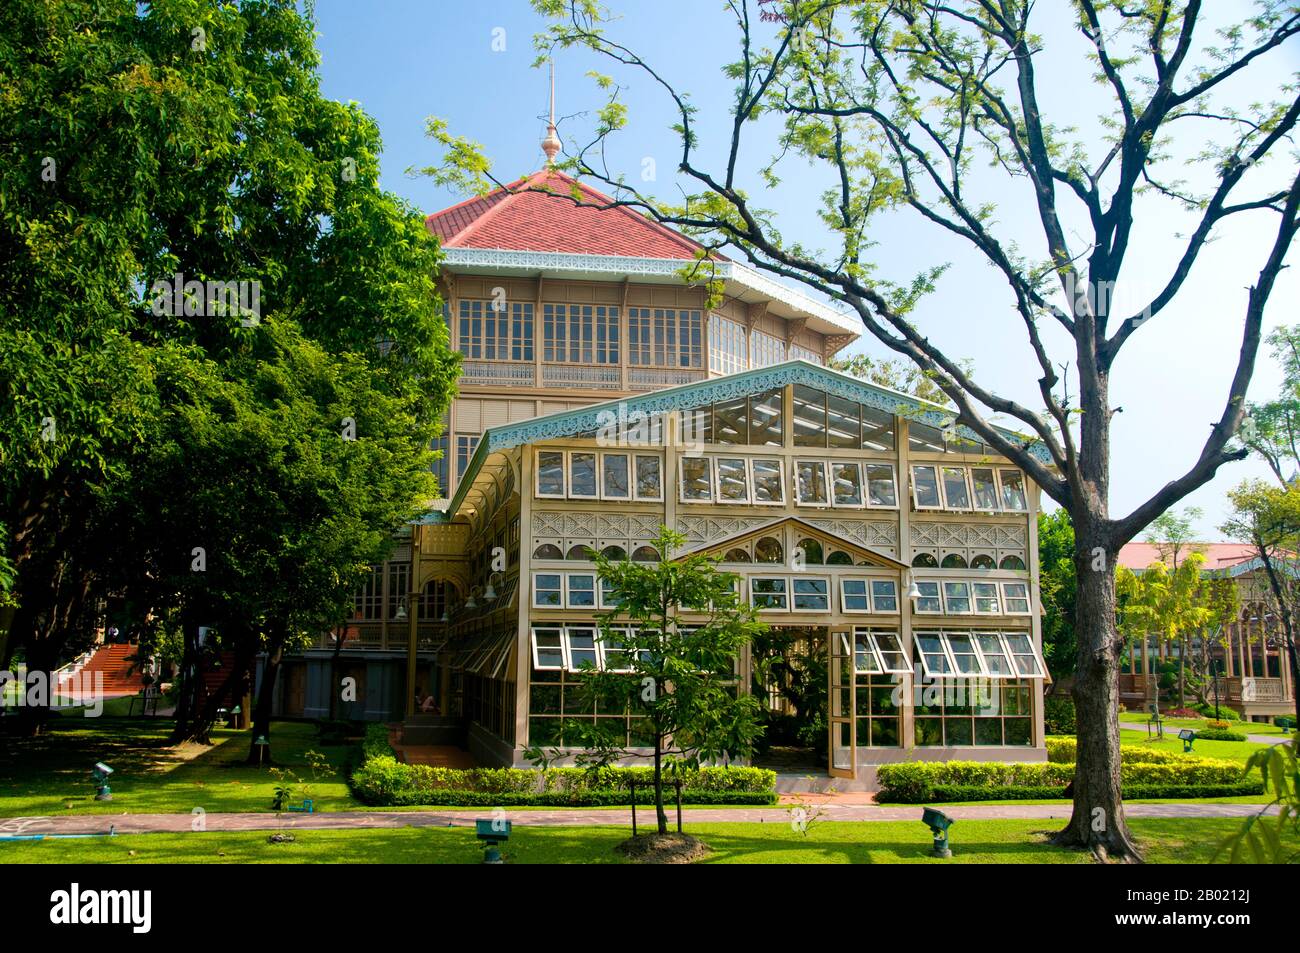 The Vimanmek Mansion is a former royal palace and is also known as the Vimanmek Teak Mansion or Vimanmek Palace.  Vimanmek Mansion was built in 1900 by King Rama V (King Chulalongkorn) by having the Munthatu Rattanaroj Residence in Chuthathuj Rachathan at Ko Sichang, Chonburi, dismantled and reassembled in Dusit Garden. It was completed on March 27, 1901 and used as a royal palace by King Rama V for five years.  In 1982 Queen Sirikit asked permission of King Rama IX (Bhumibol Adulyadej) to renovate Vimanmek Palace for use as a museum to commemorate King Rama V by displaying his photographs, pe Stock Photo